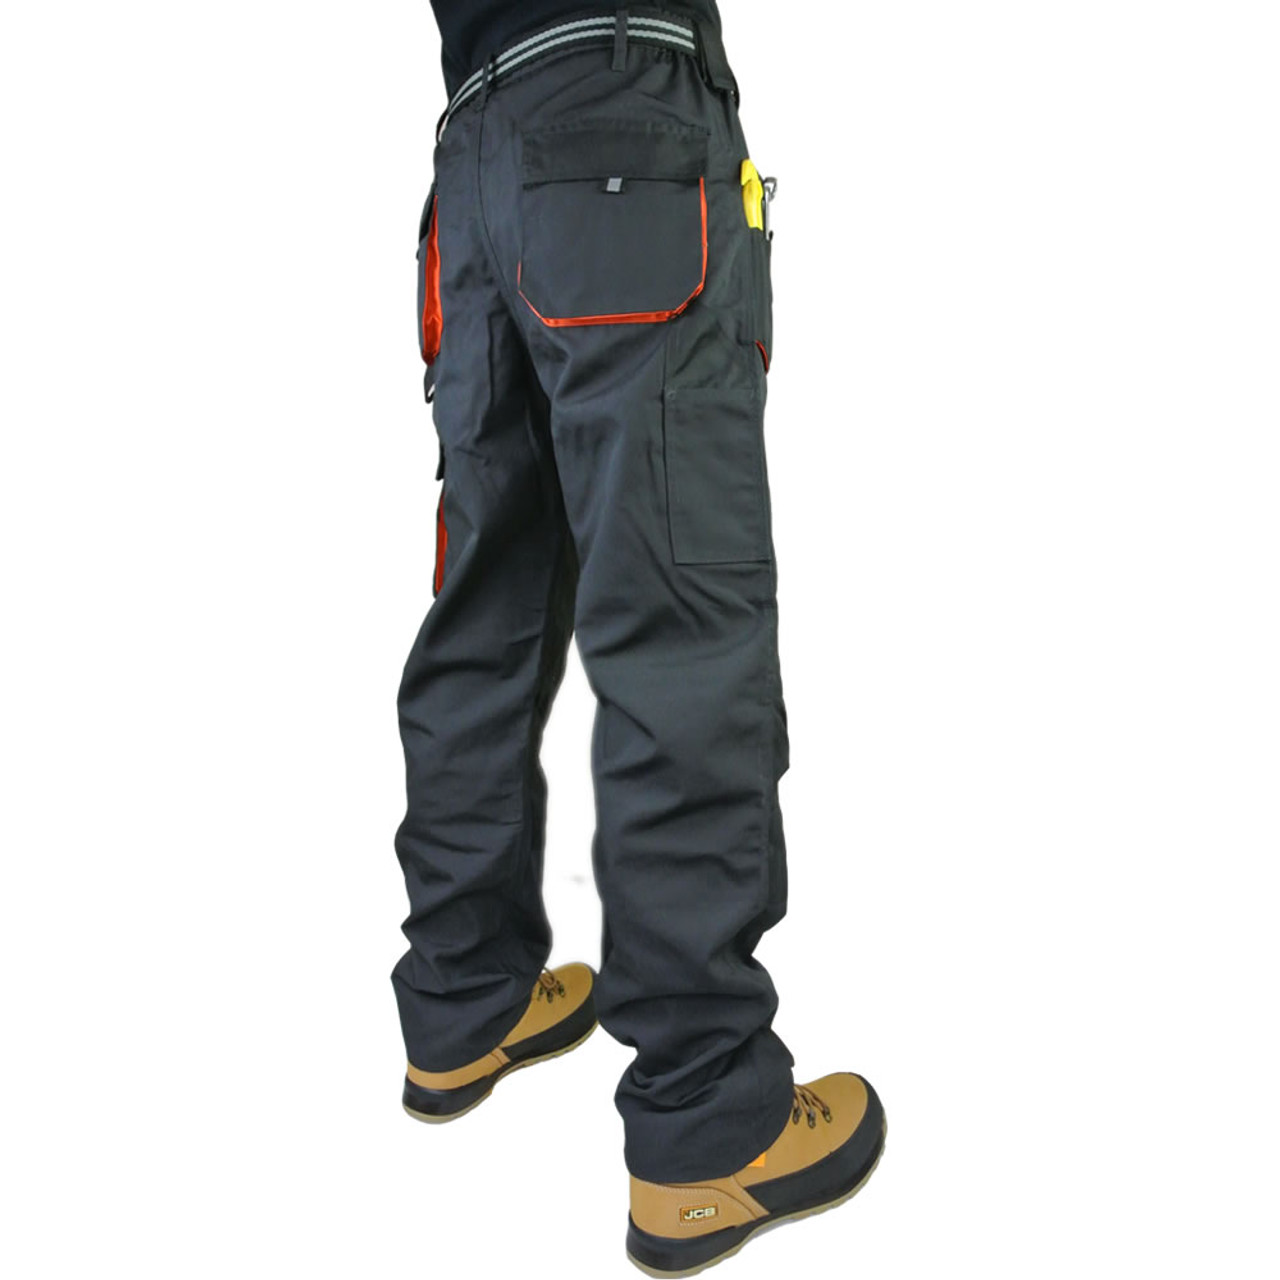 Blaklader Basic Cargo Combat Work Trousers 100 Cotton Twill 1400 1370  Trousers ActiveWorkwear